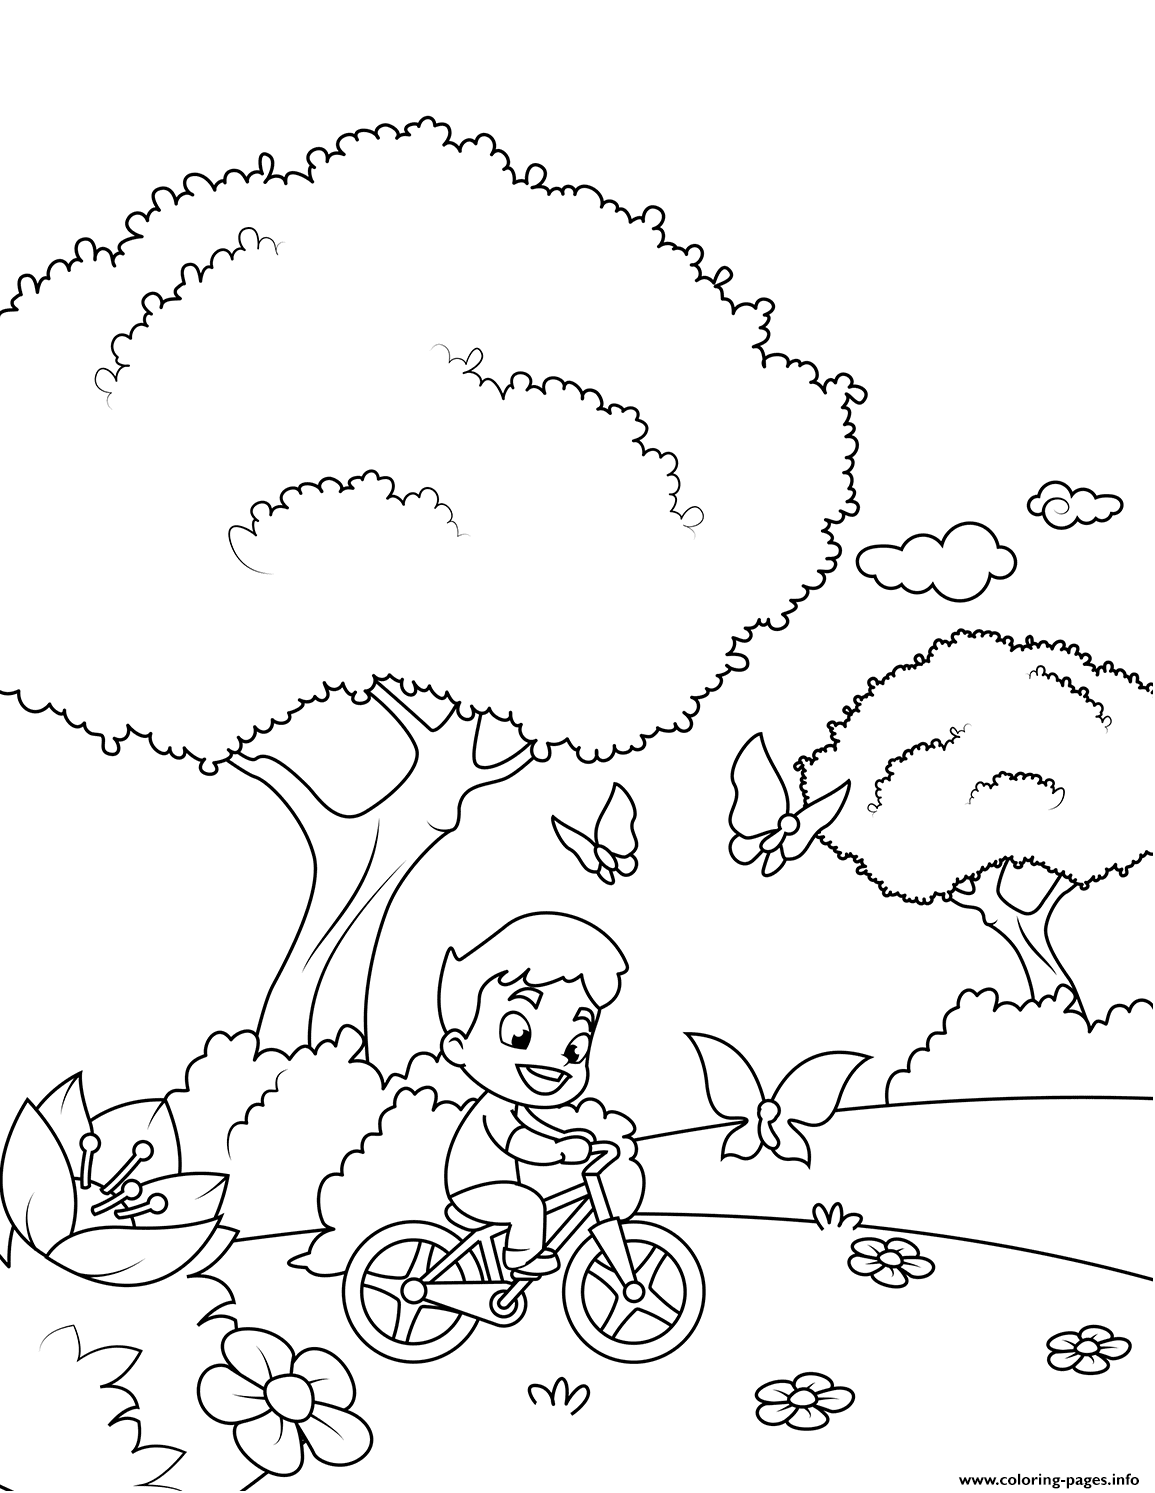 Boy On A Bicycle Chasing Butterflies coloring